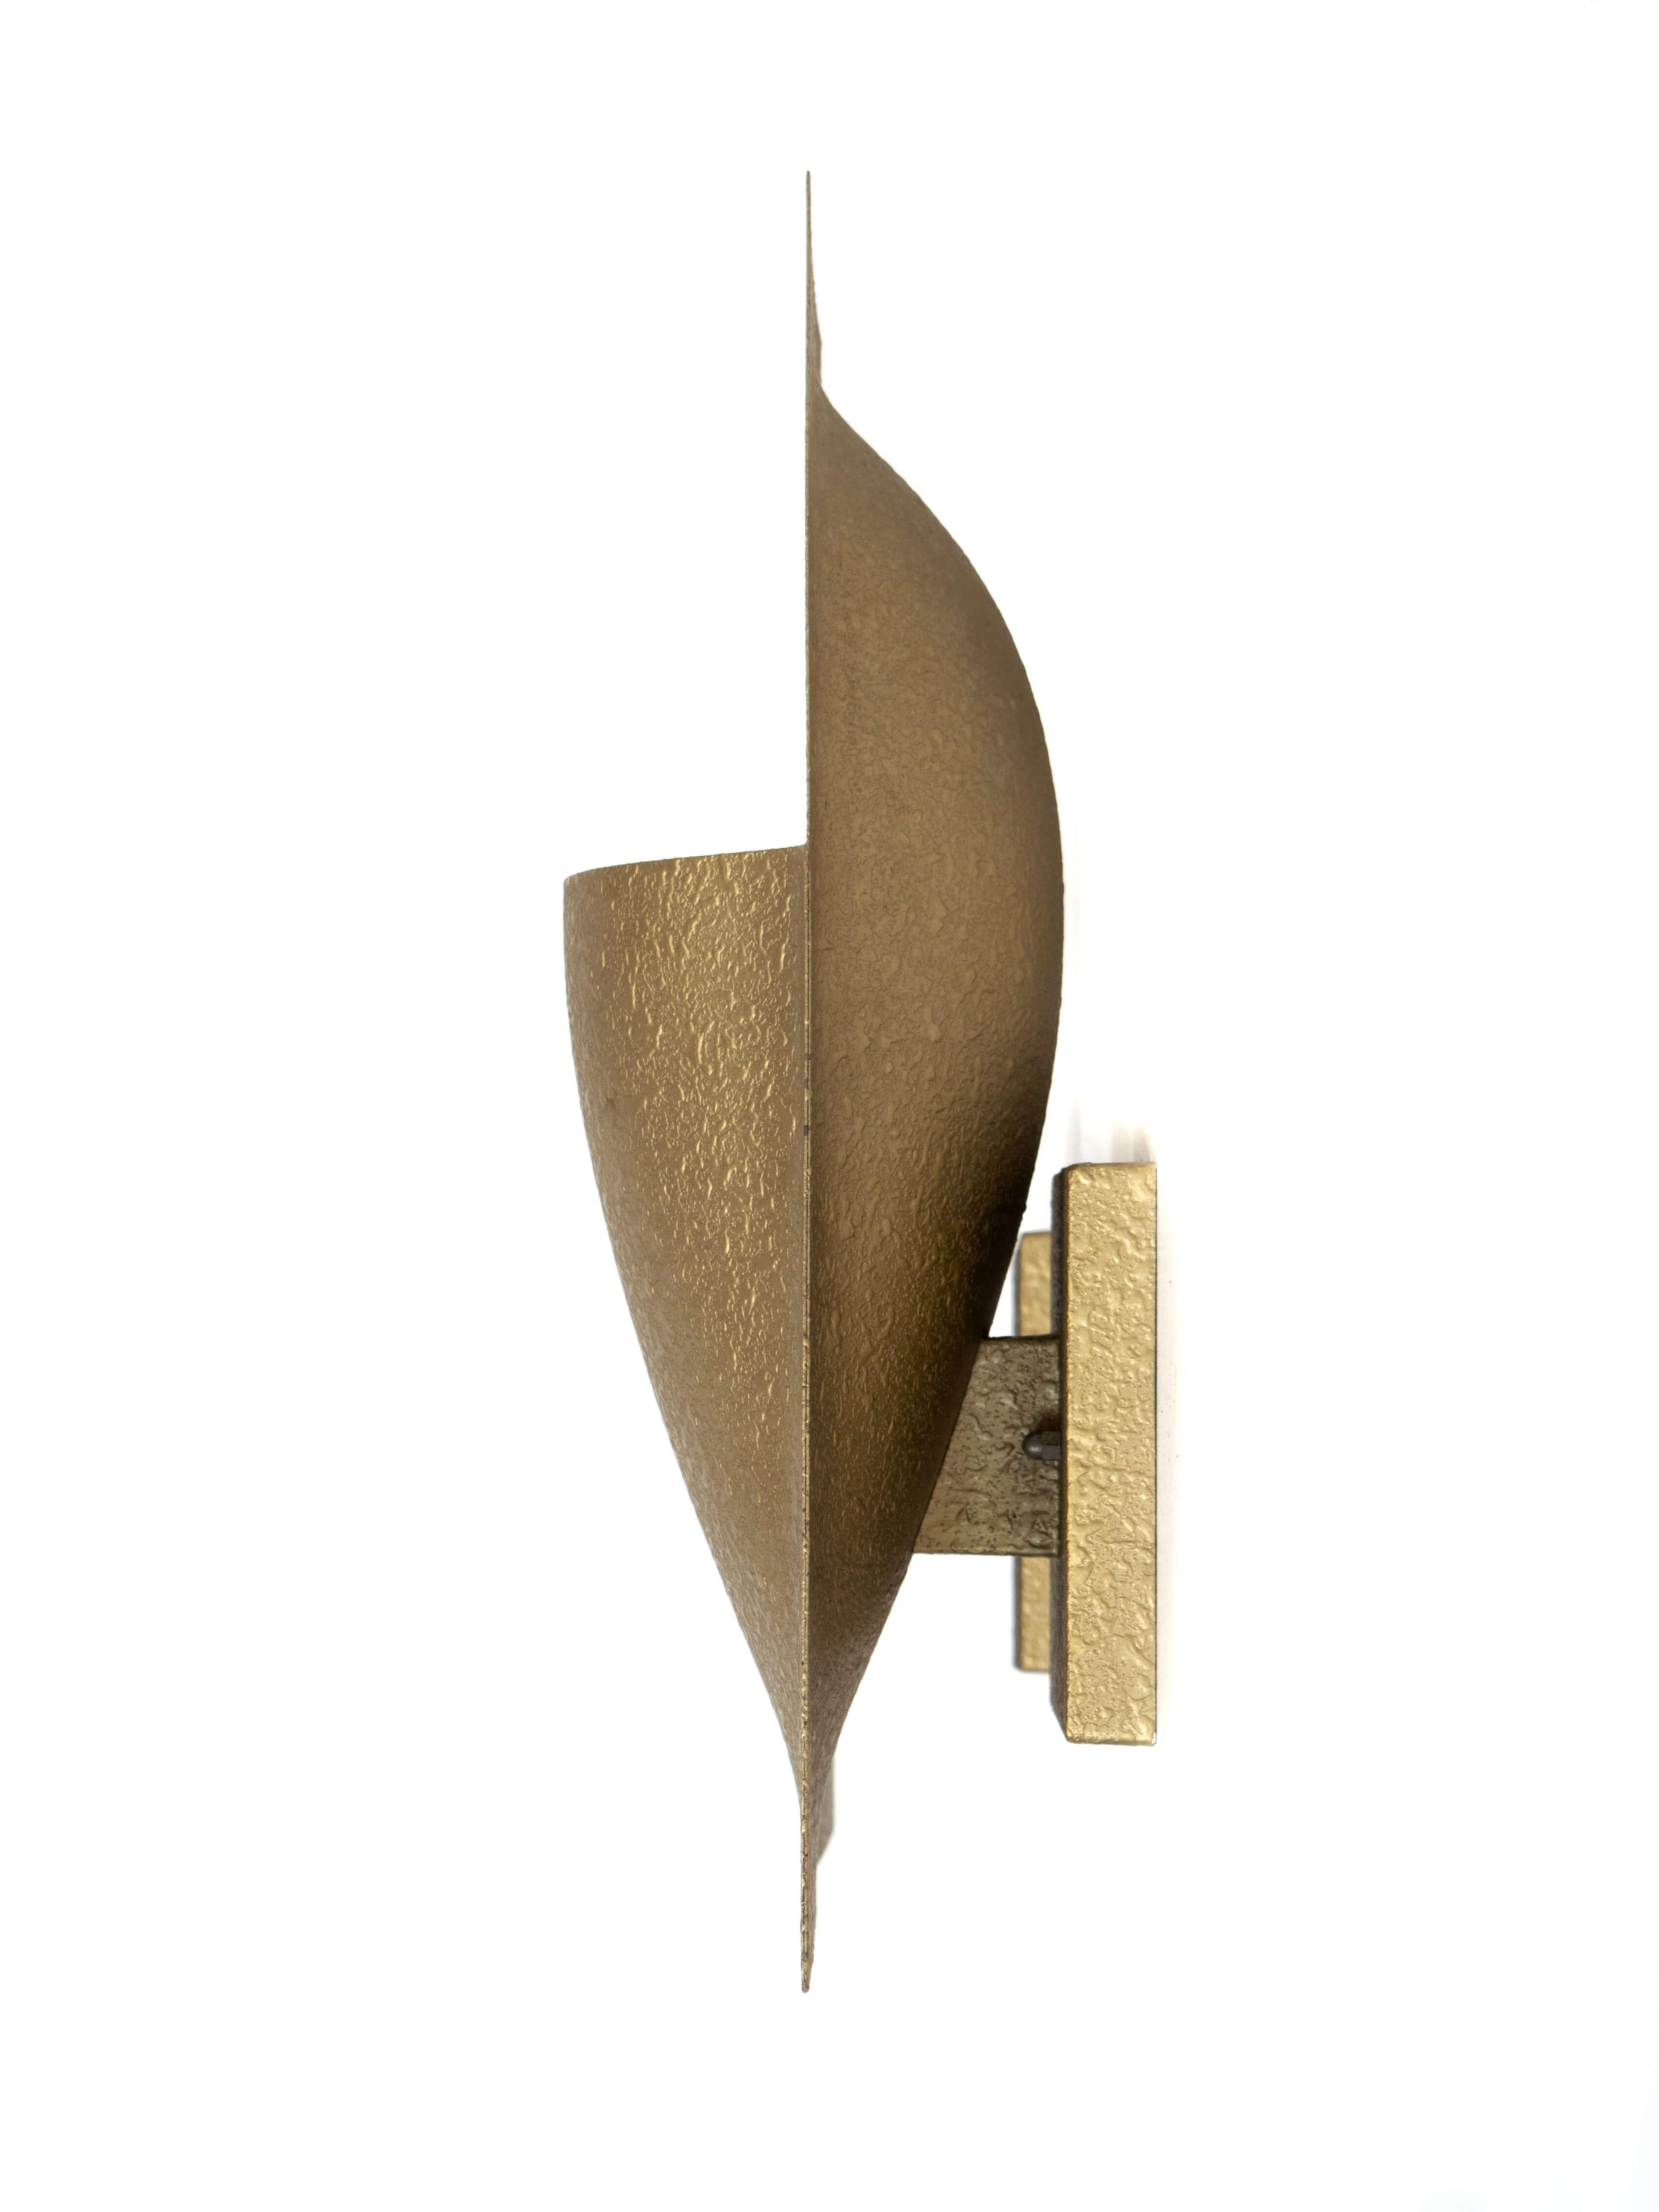 Amazing Bertrand Balas 'Balance' wall light for RAAK with Model C-1550 from the Netherlands 1960s. The scone has a gold-coloured leaf shape with a granulated structure. You can hang it in both directions; with the opening up or down. It is in great